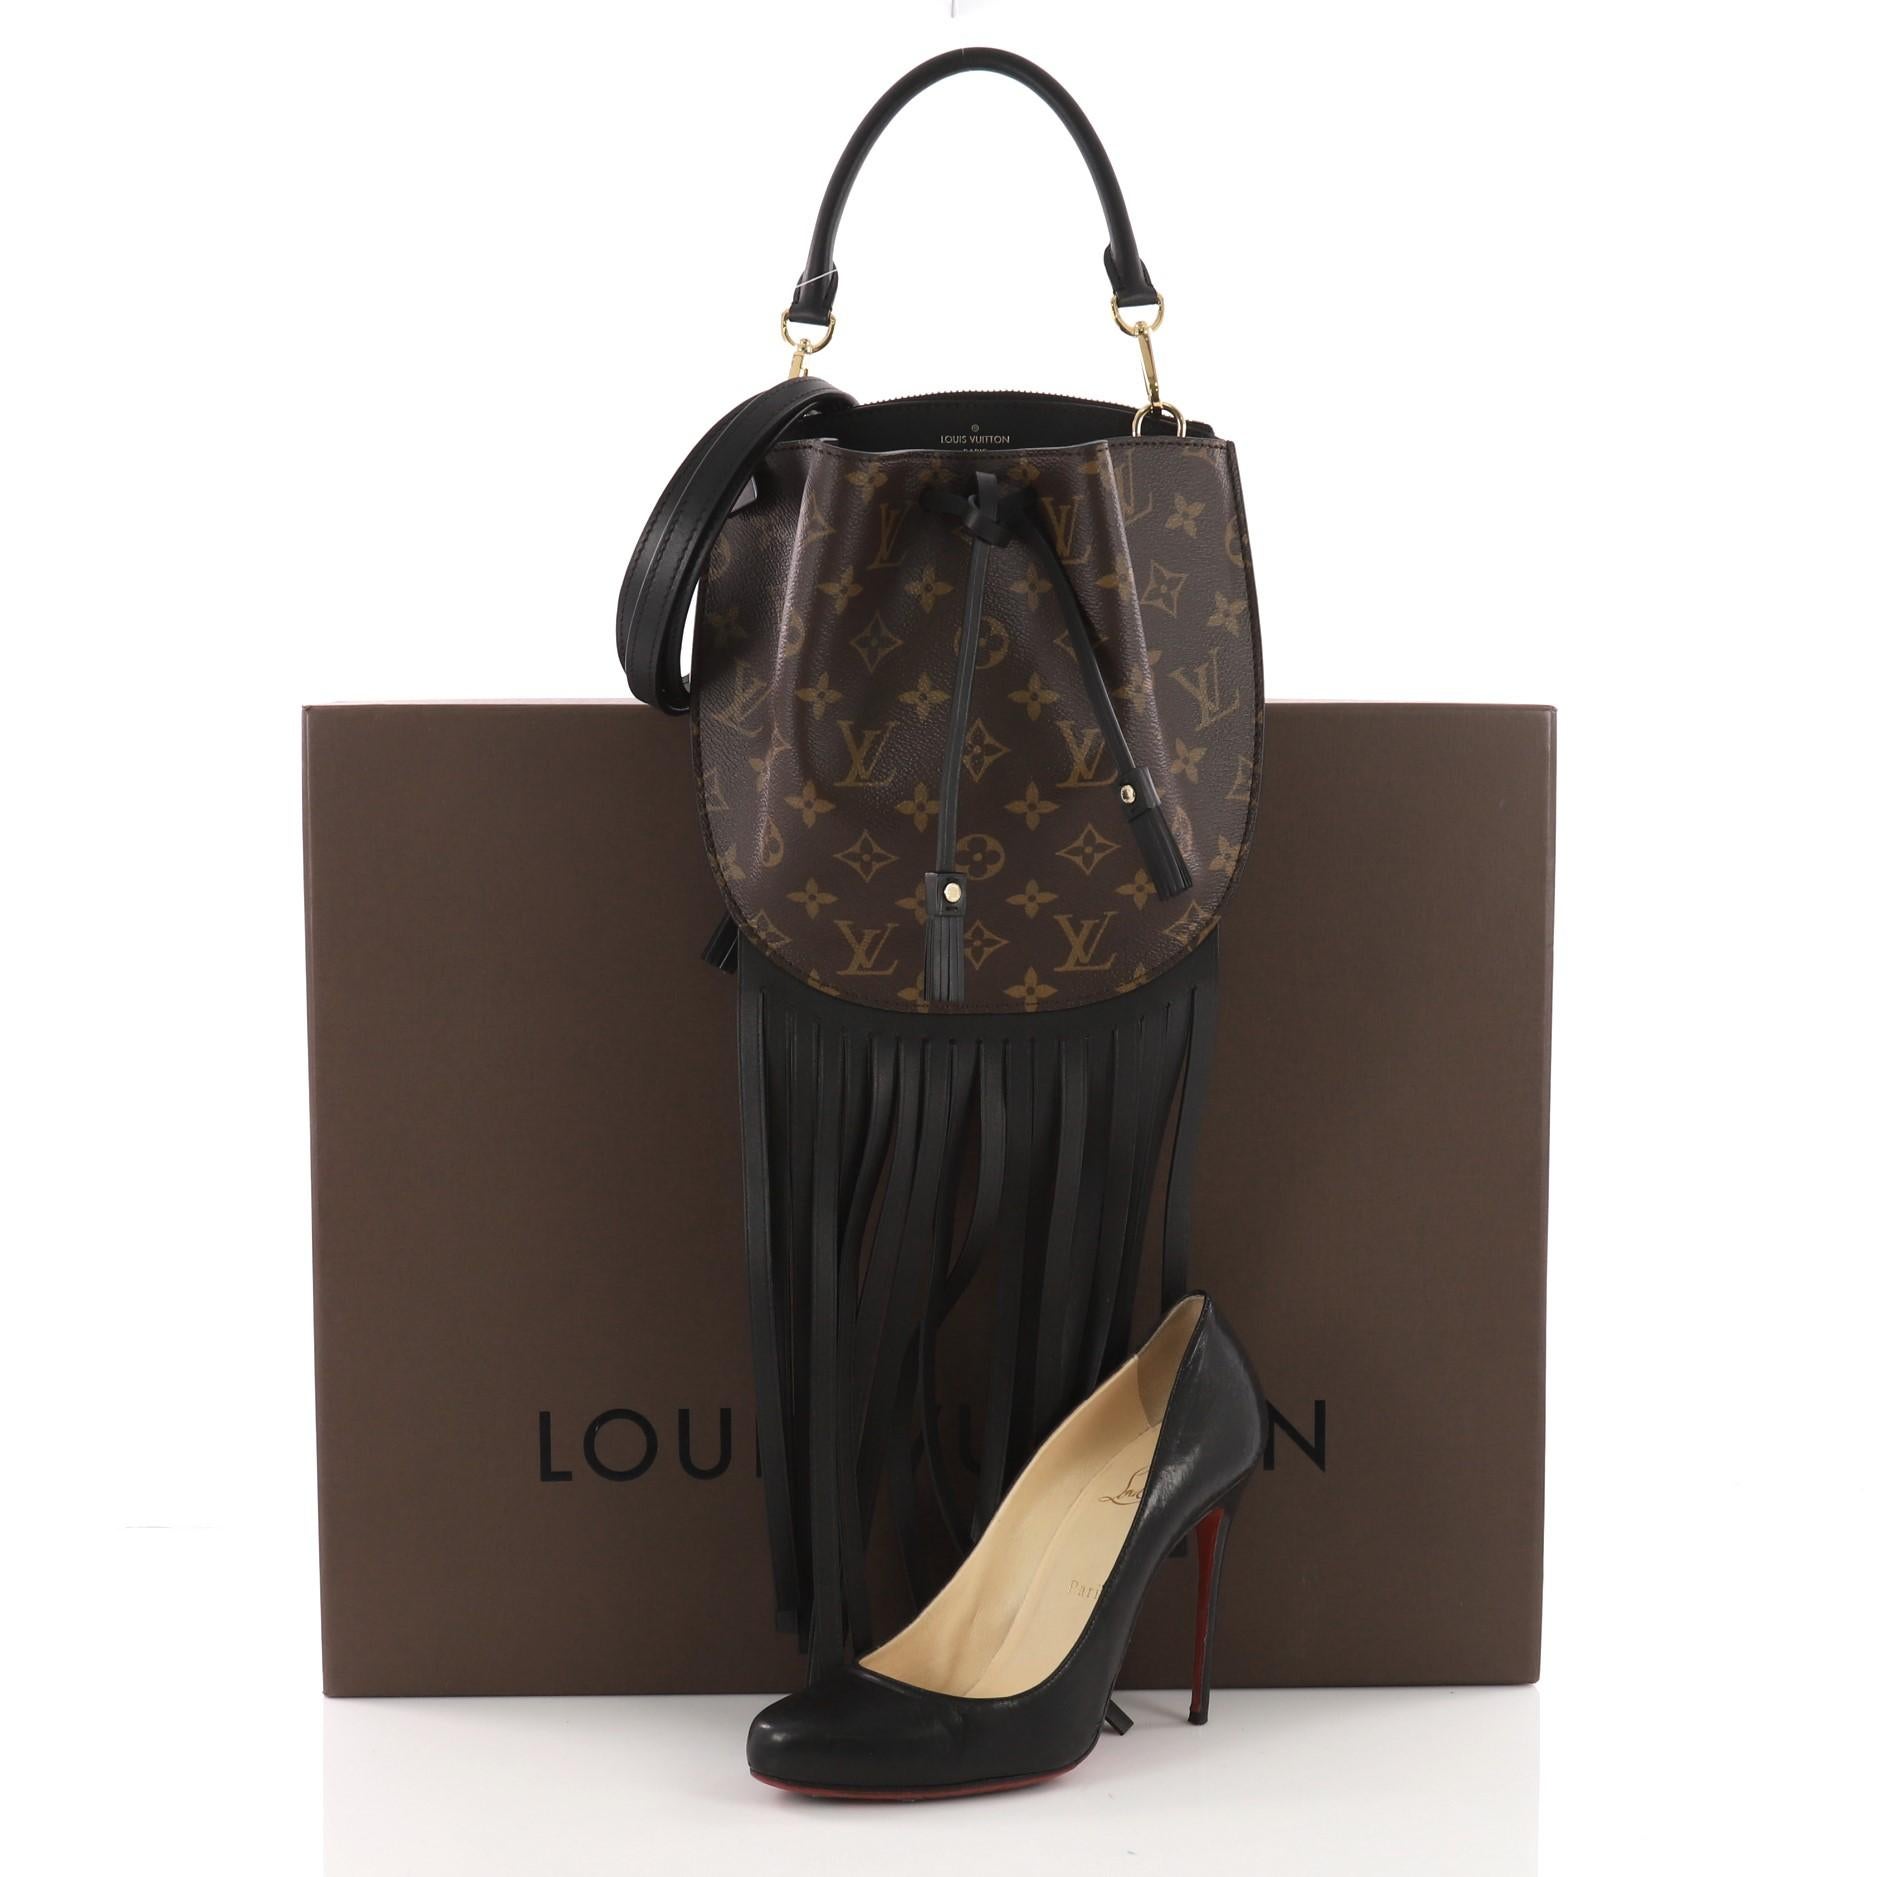 This Louis Vuitton Fringed Noe Monogram Canvas with Leather, crafted in brown monogram coated canvas, features cascading black leather fringe, supple pleated construction, and gold-tone hardware. Its drawstring closure opens to a black microfiber